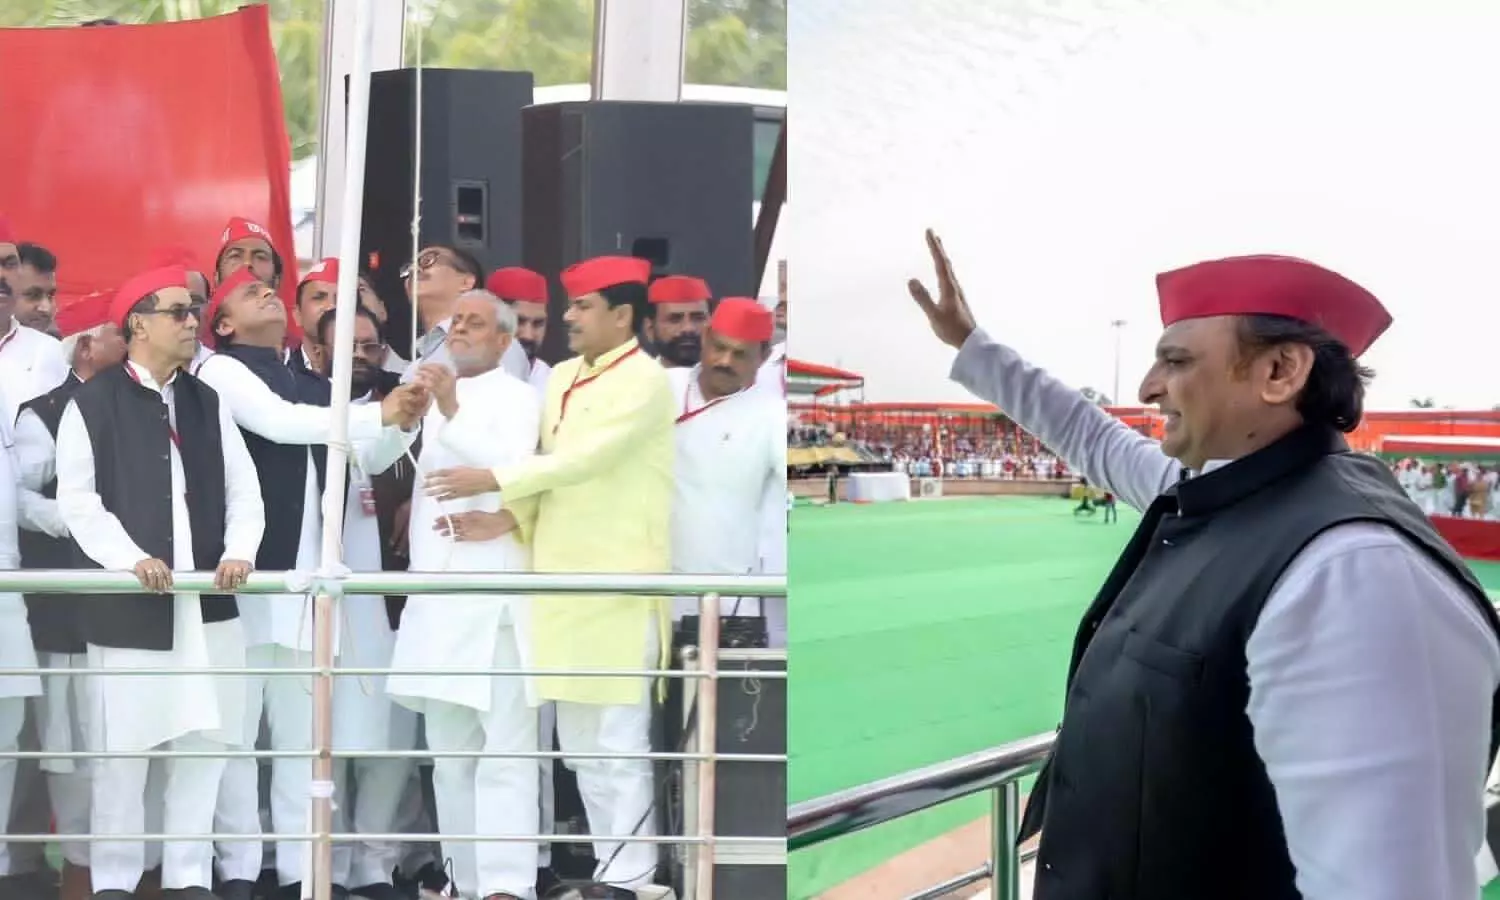 Akhilesh Yadav reached Ramabai to attend the national convention of the Samajwadi Party, hoisted the flag